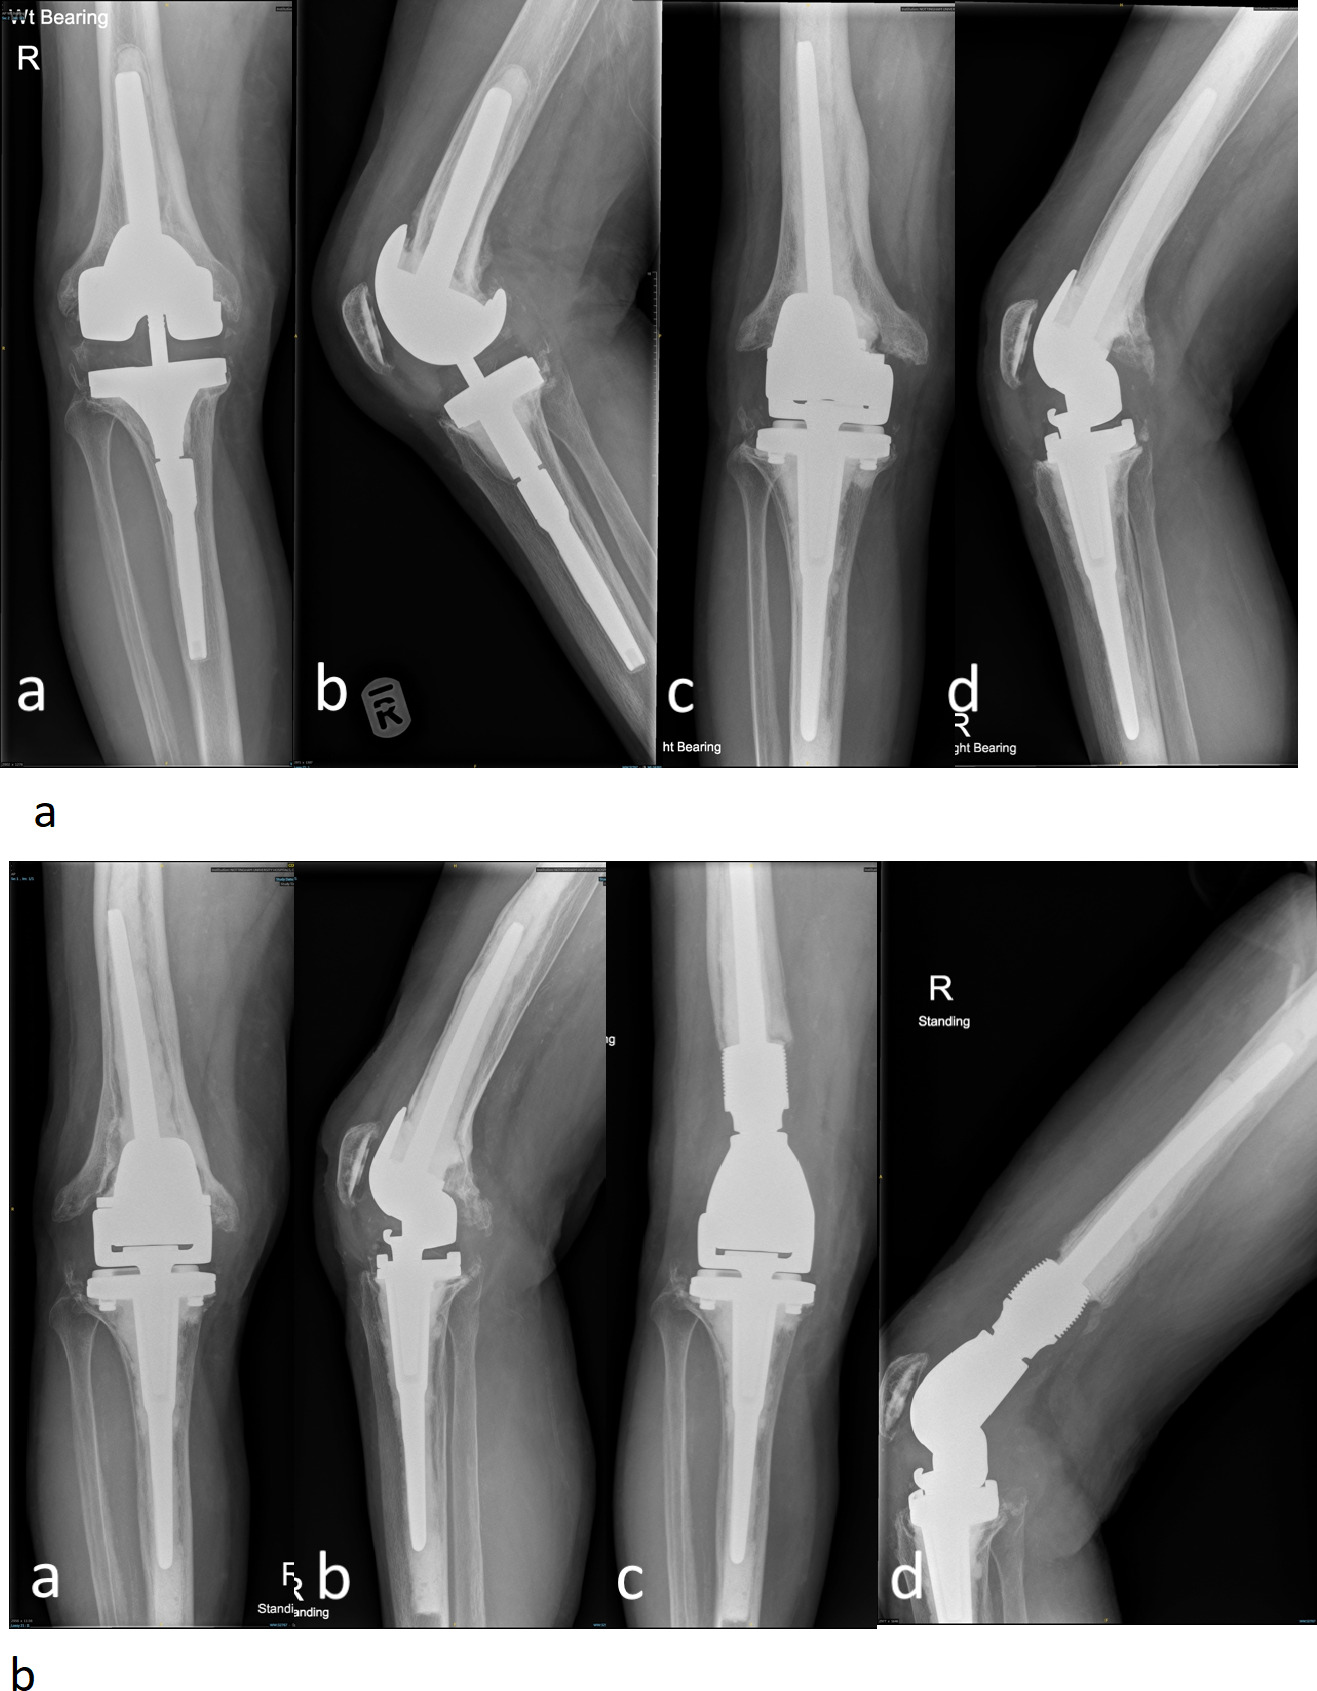 Fig. 4 
          a, b) Preoperative anteroposterior and lateral radiographs of right revision knee in a 75-year-old female with aseptic loosening and instability. c, d) Postoperative radiographs following re-revision total knee arthoplasty with a rotating hinge Stanmore Modular Individualized Lower Limb System (SMILES) prosthesis. b) Anteroposterior and lateral radiographs at 5.6 years follow-up with loosening around the femoral component with well-fixed tibial component. c, d) Anteroposterior and lateral radiographs following single component revision to a distal femoral replacement of the same system retaining the tibial component.
        